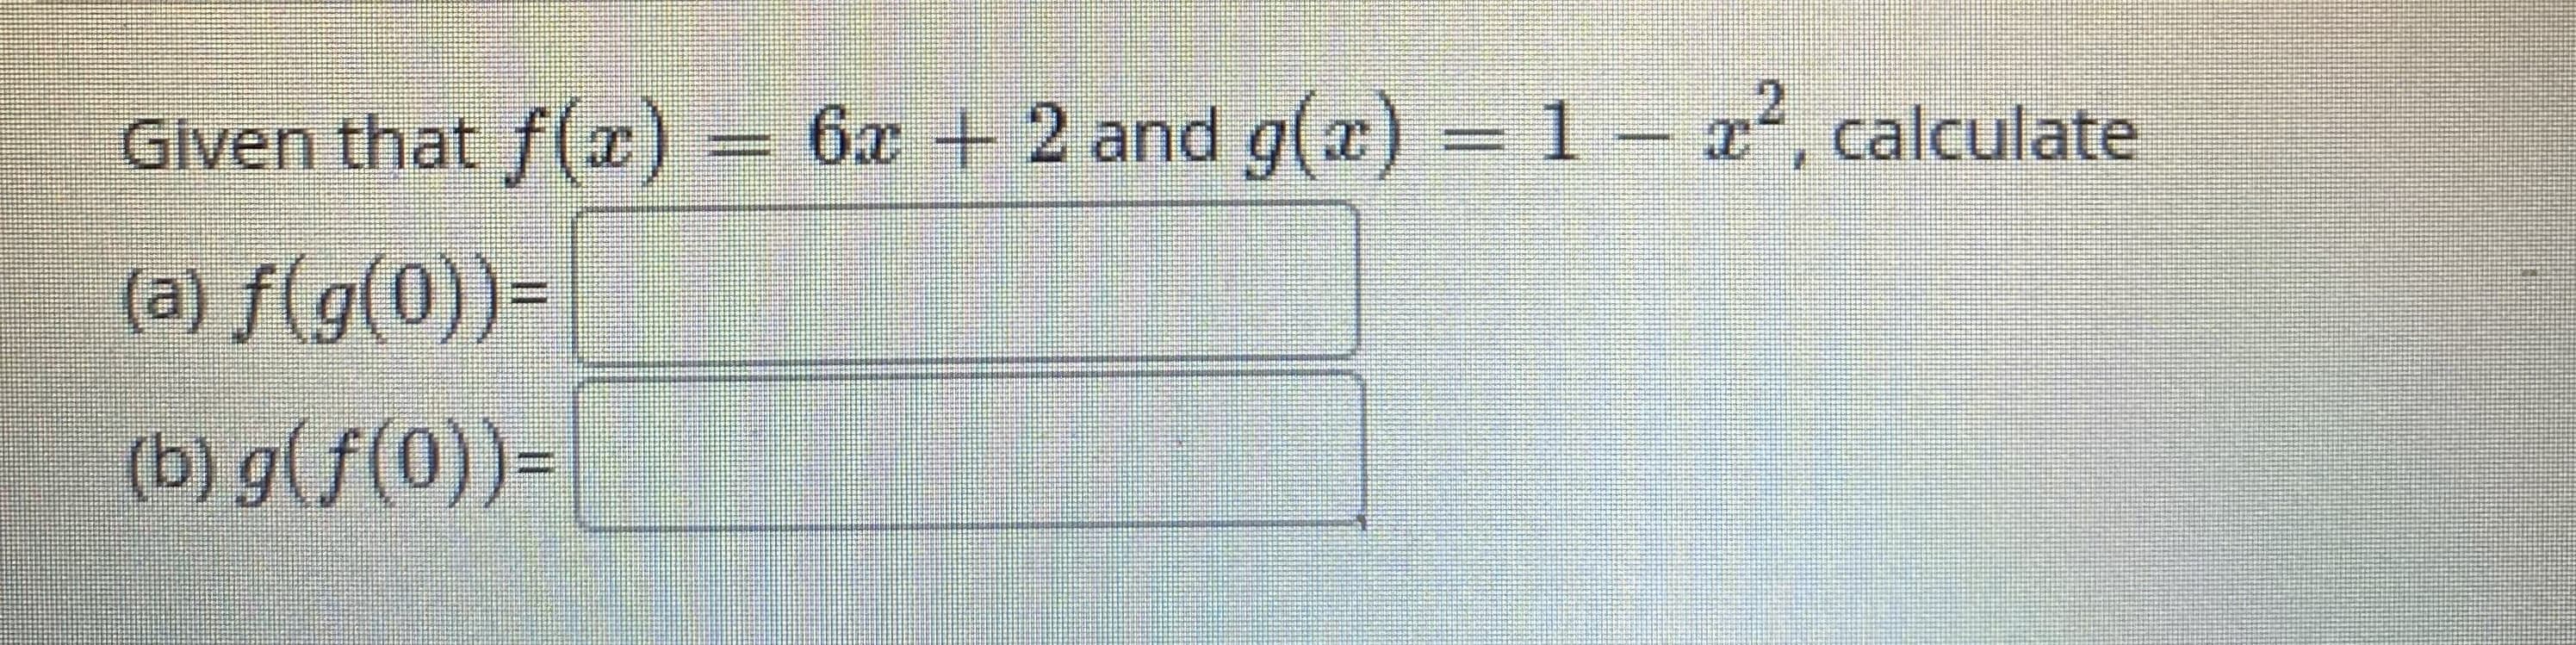 Glven that f() = 6x + 2 and g(x) = 1
- x, calculate
